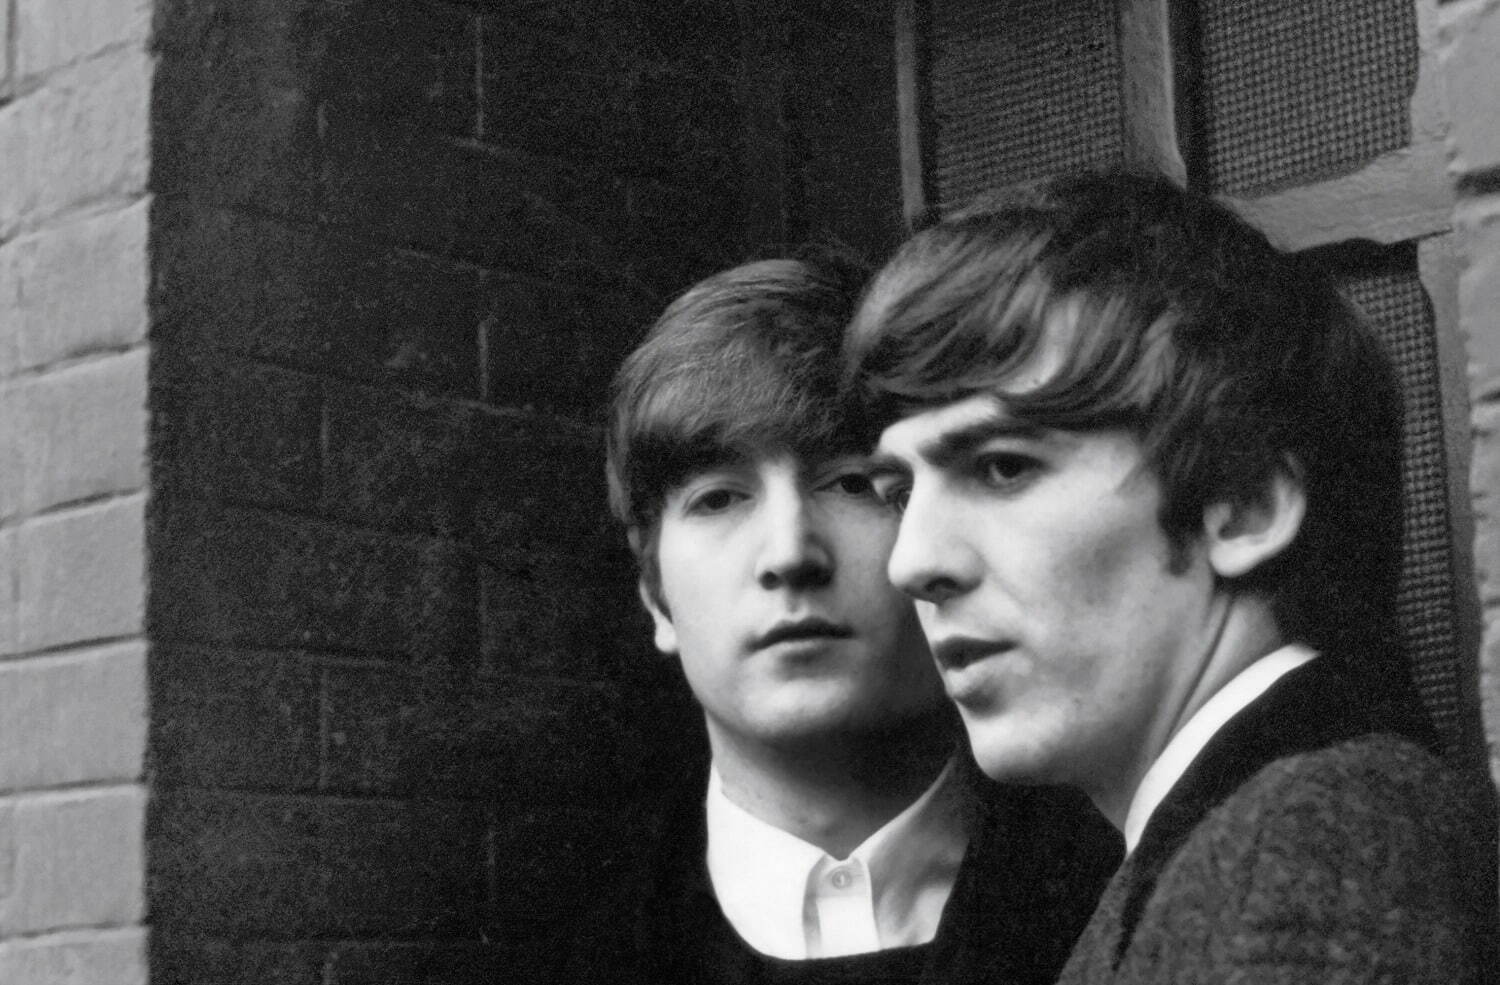 John and George. Paris, January 1964
© 1964 Paul McCartney under exclusive license to MPL Archive LLP